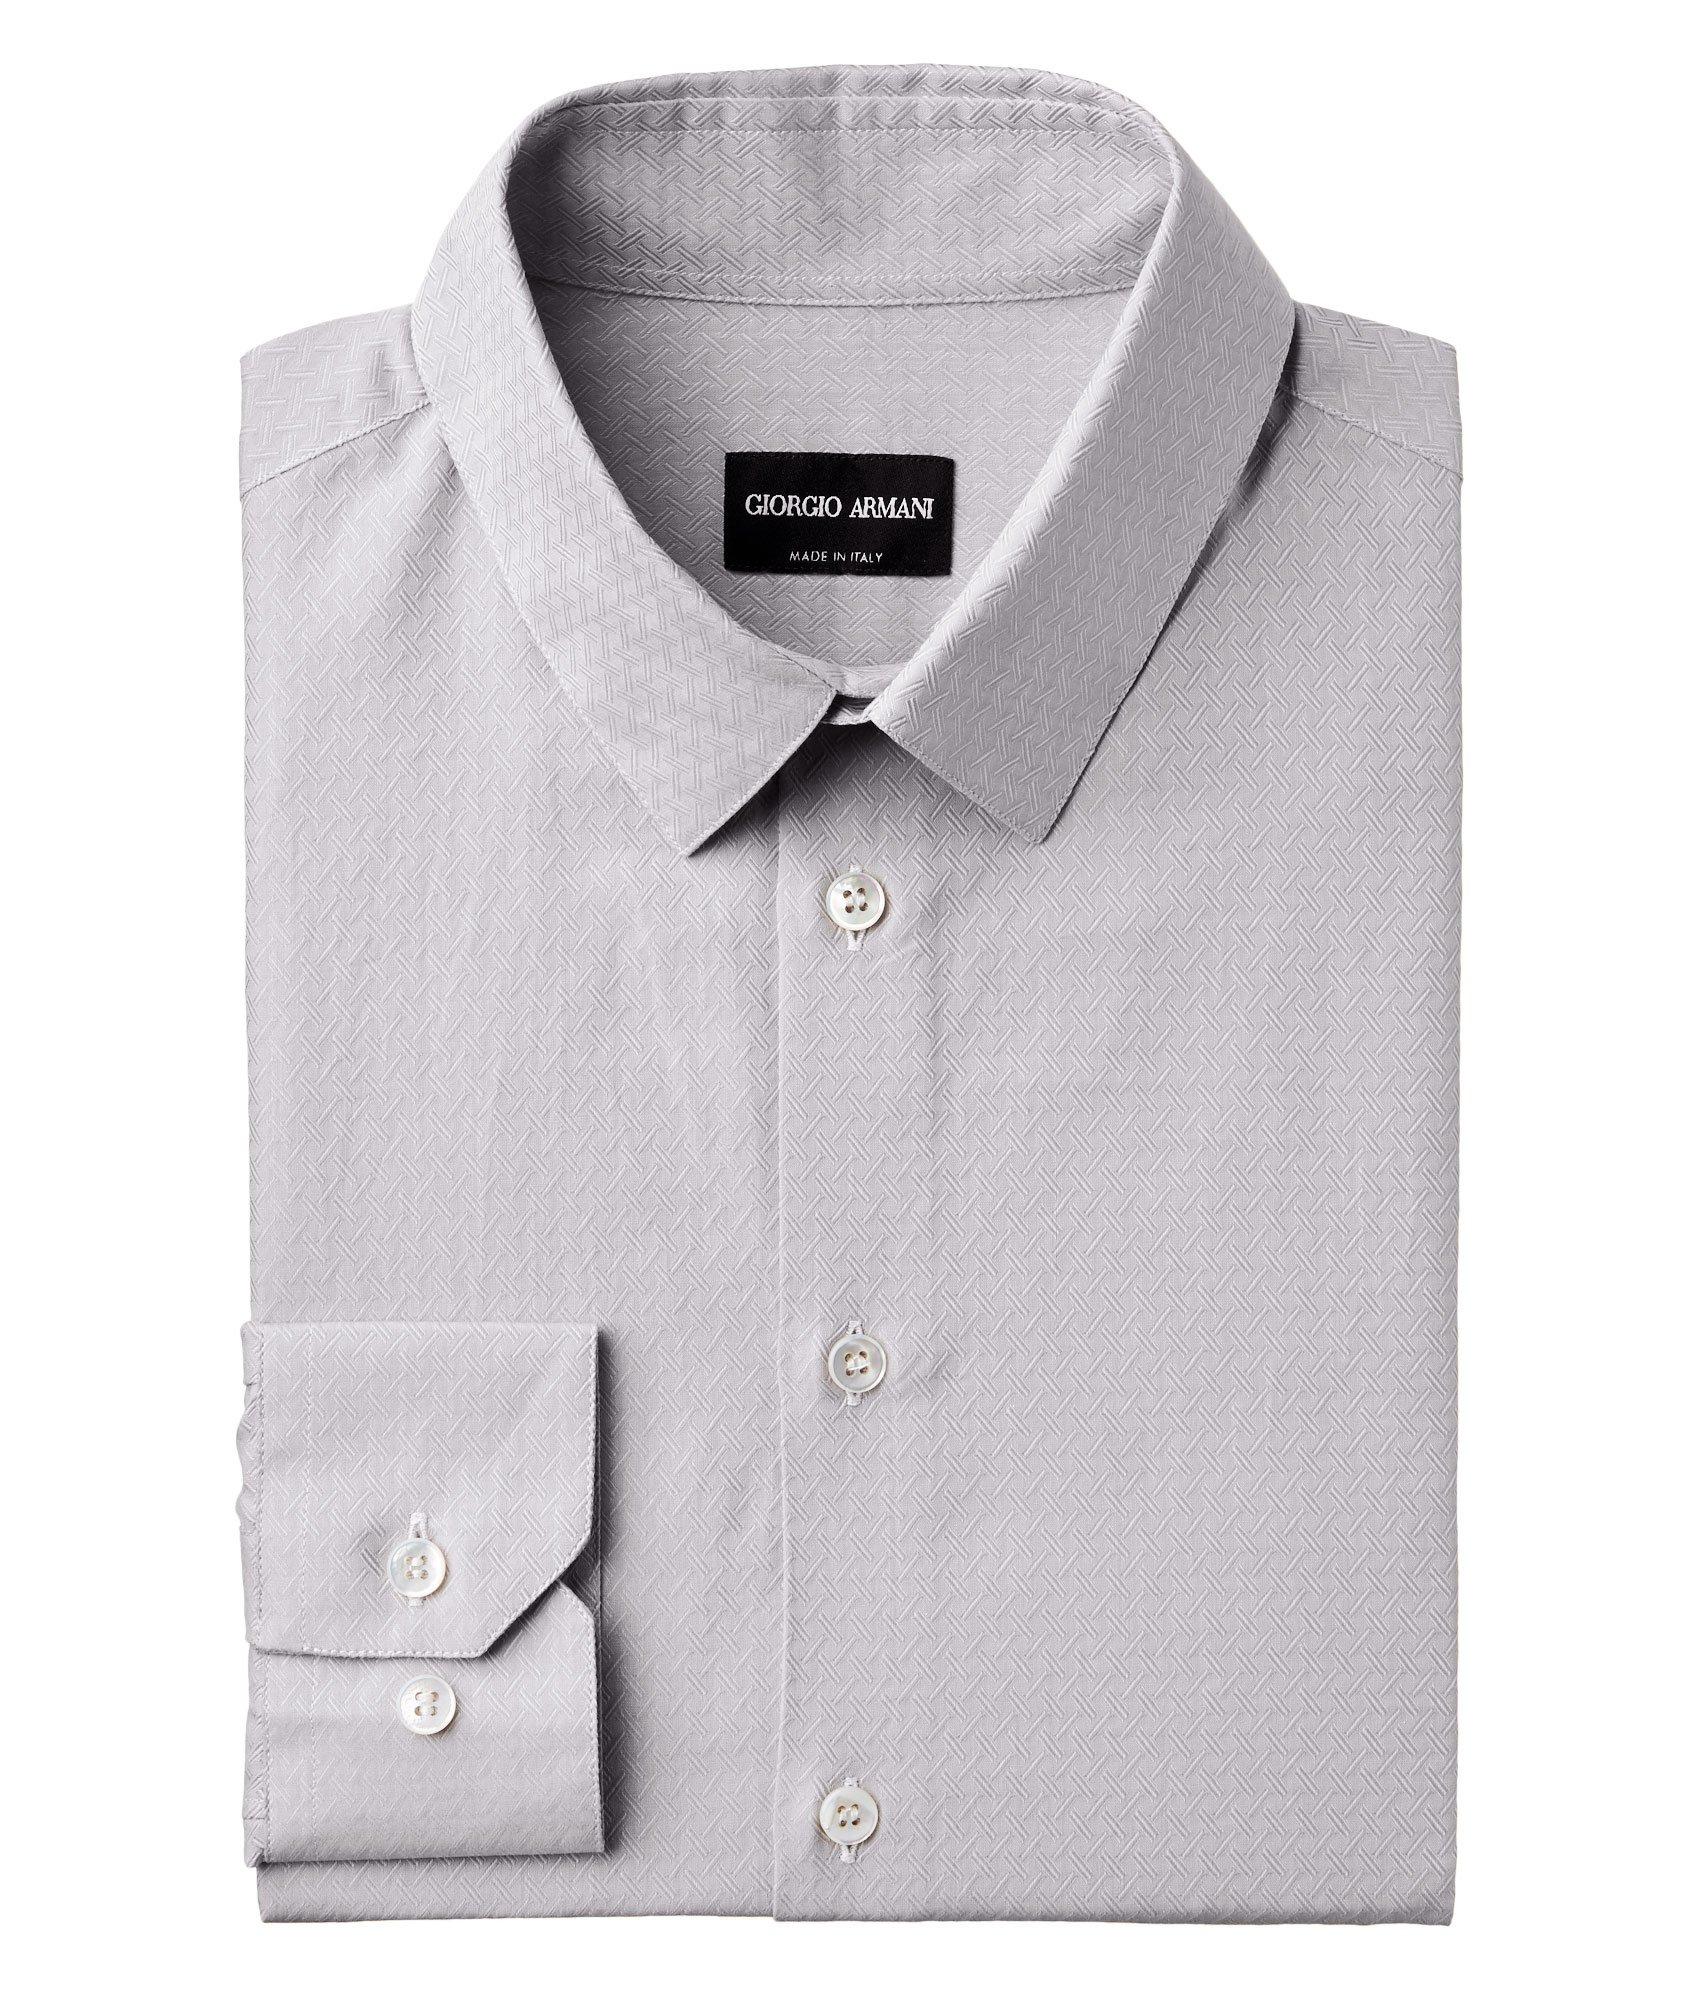 Contemporary Fit Printed Dress Shirt image 0